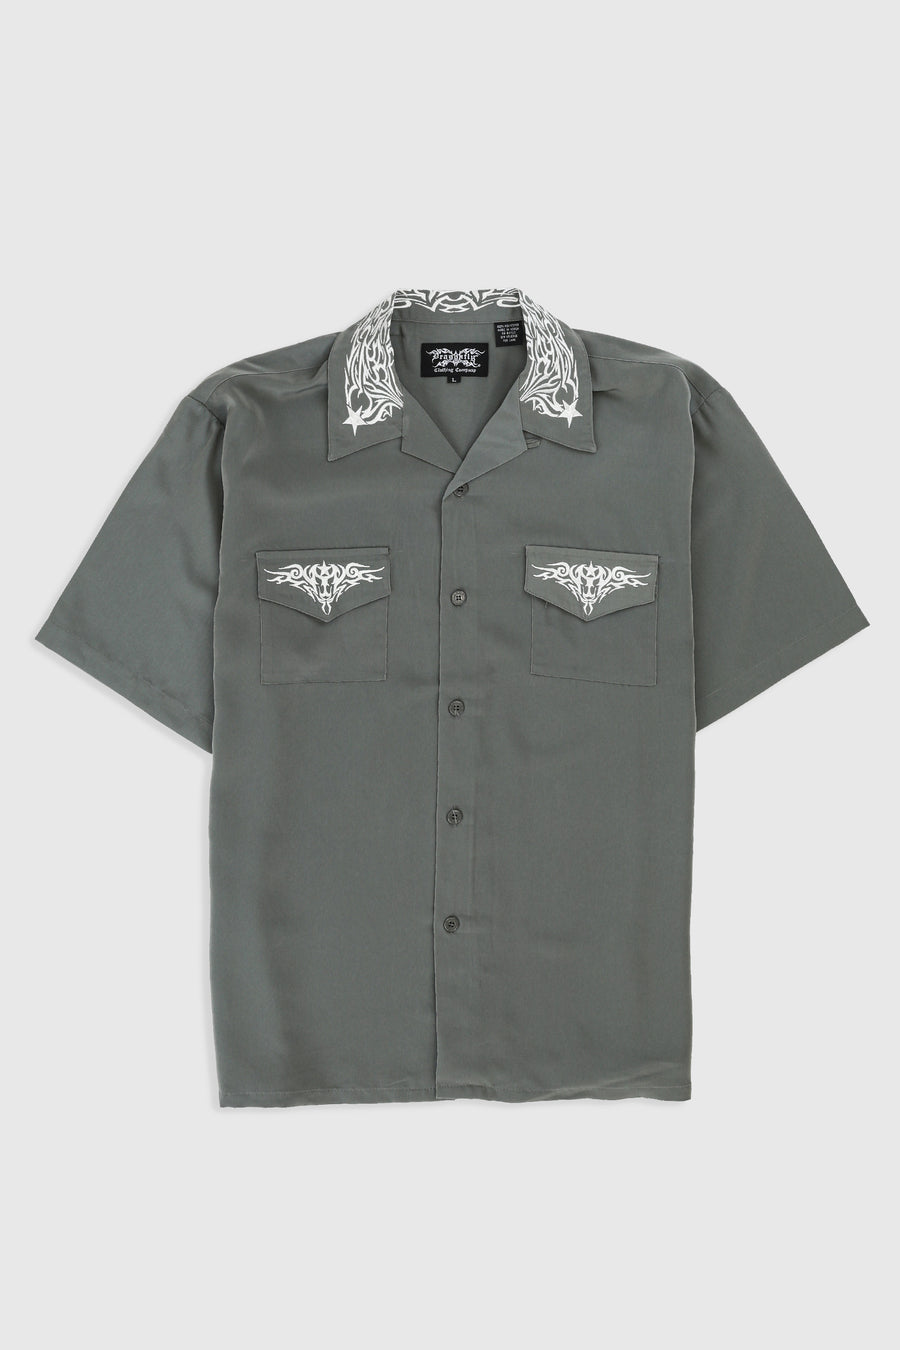 Deadstock Dragonfly Silver Star Camp Shirt - L